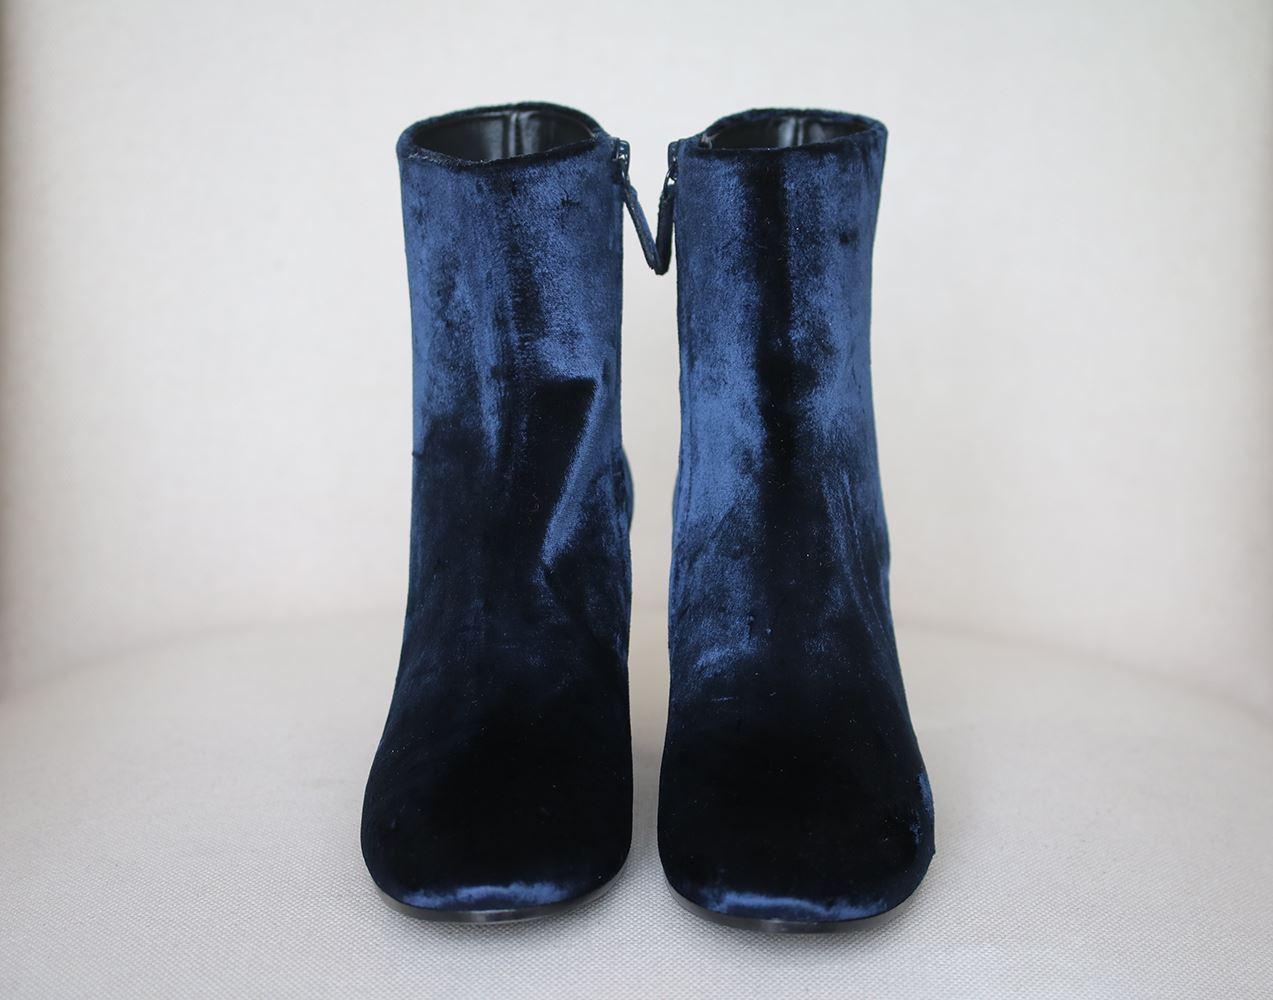 Velvet always comes with sumptuous appeal, and Balenciaga's deep navy boots are no exception. They're crafted in Italy to a round-toe silhouette that's set on a manageable block heel, and rise high on the ankles – the perfect match for cropped